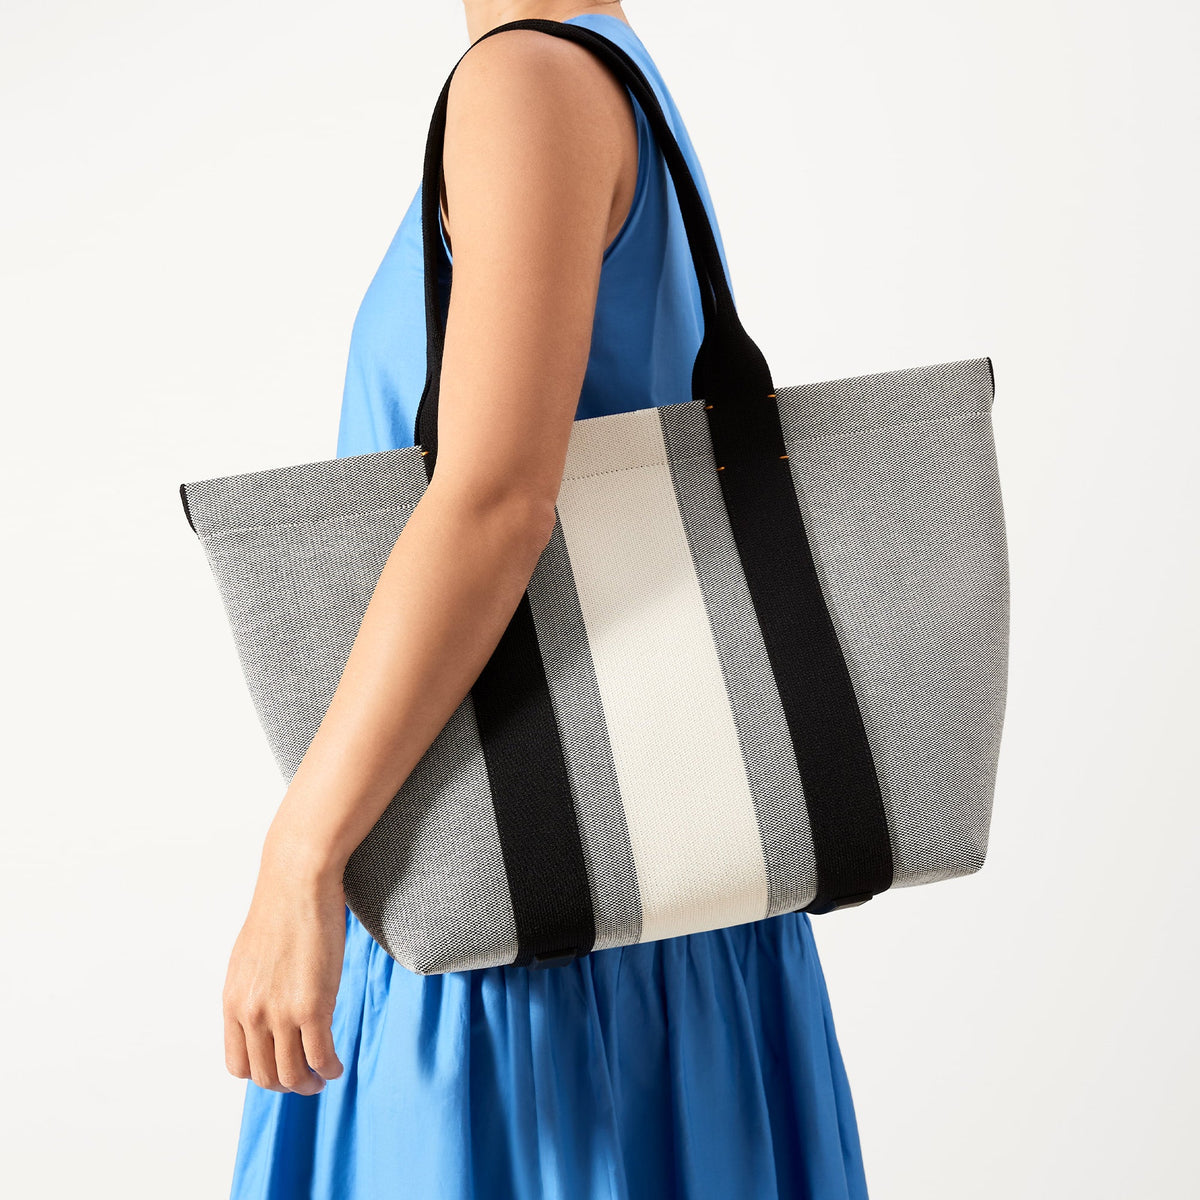 The Essential Tote in Grey Mist | Bags & Accessories | Rothy's